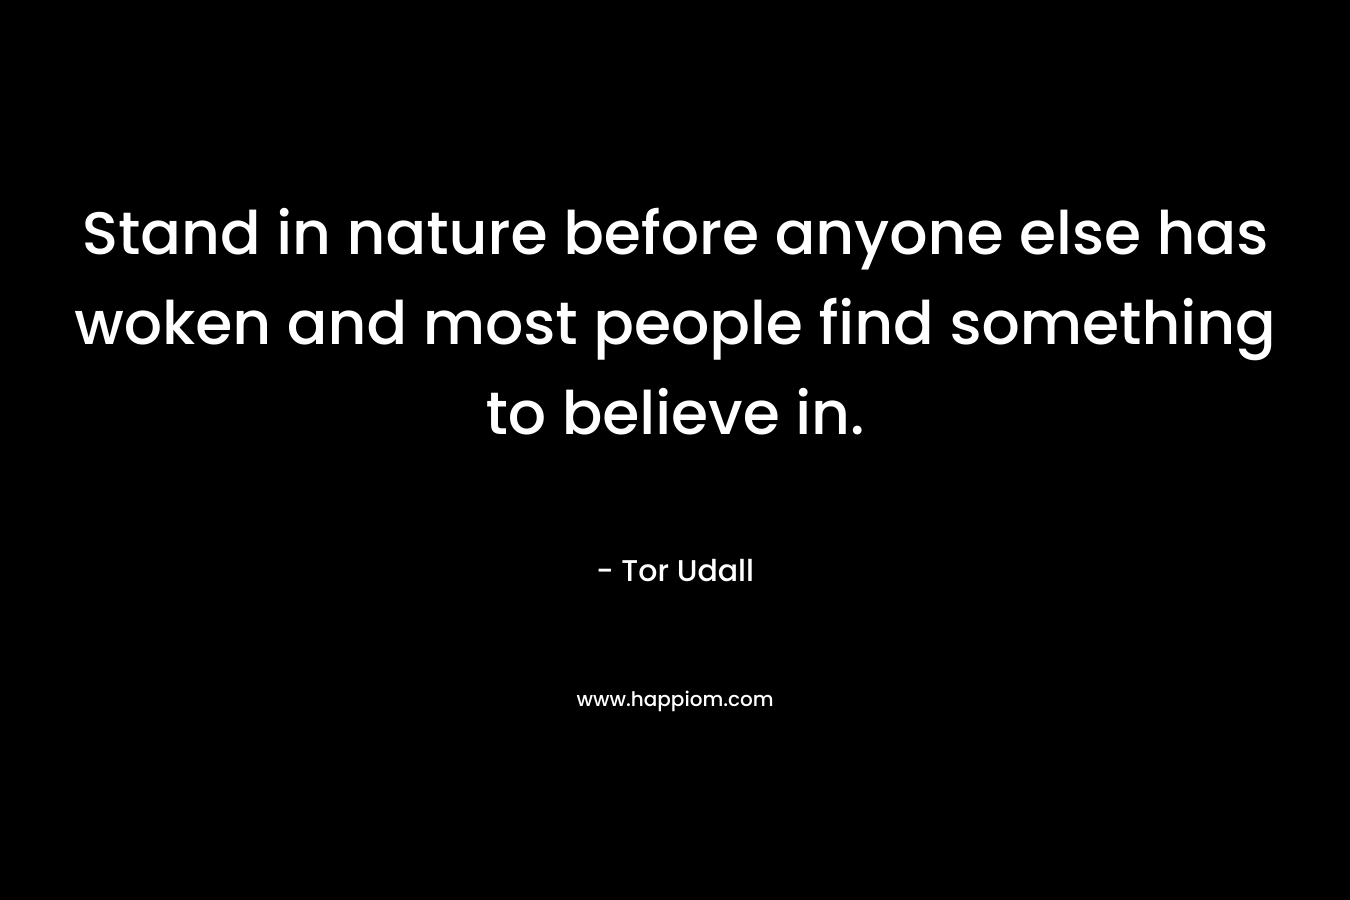 Stand in nature before anyone else has woken and most people find something to believe in. – Tor Udall